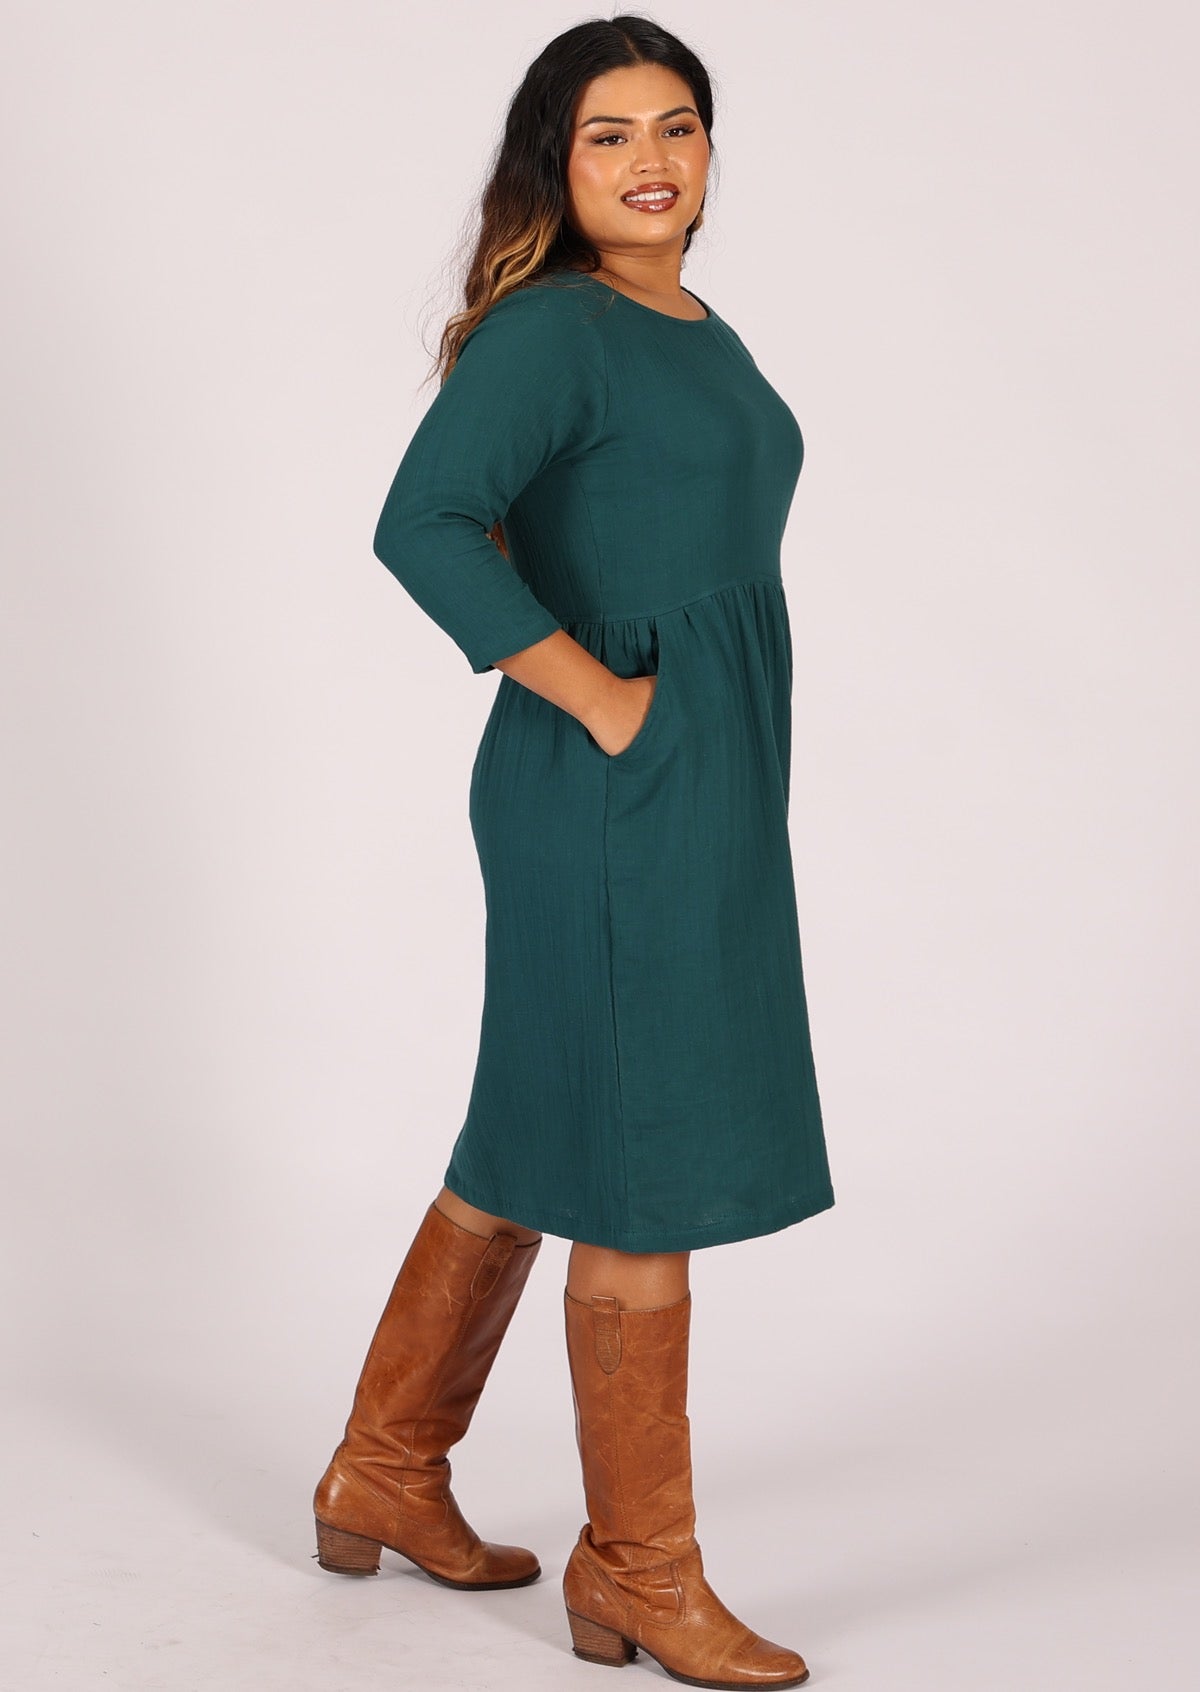 Deep teal double cotton dress with pockets is great for every day wear